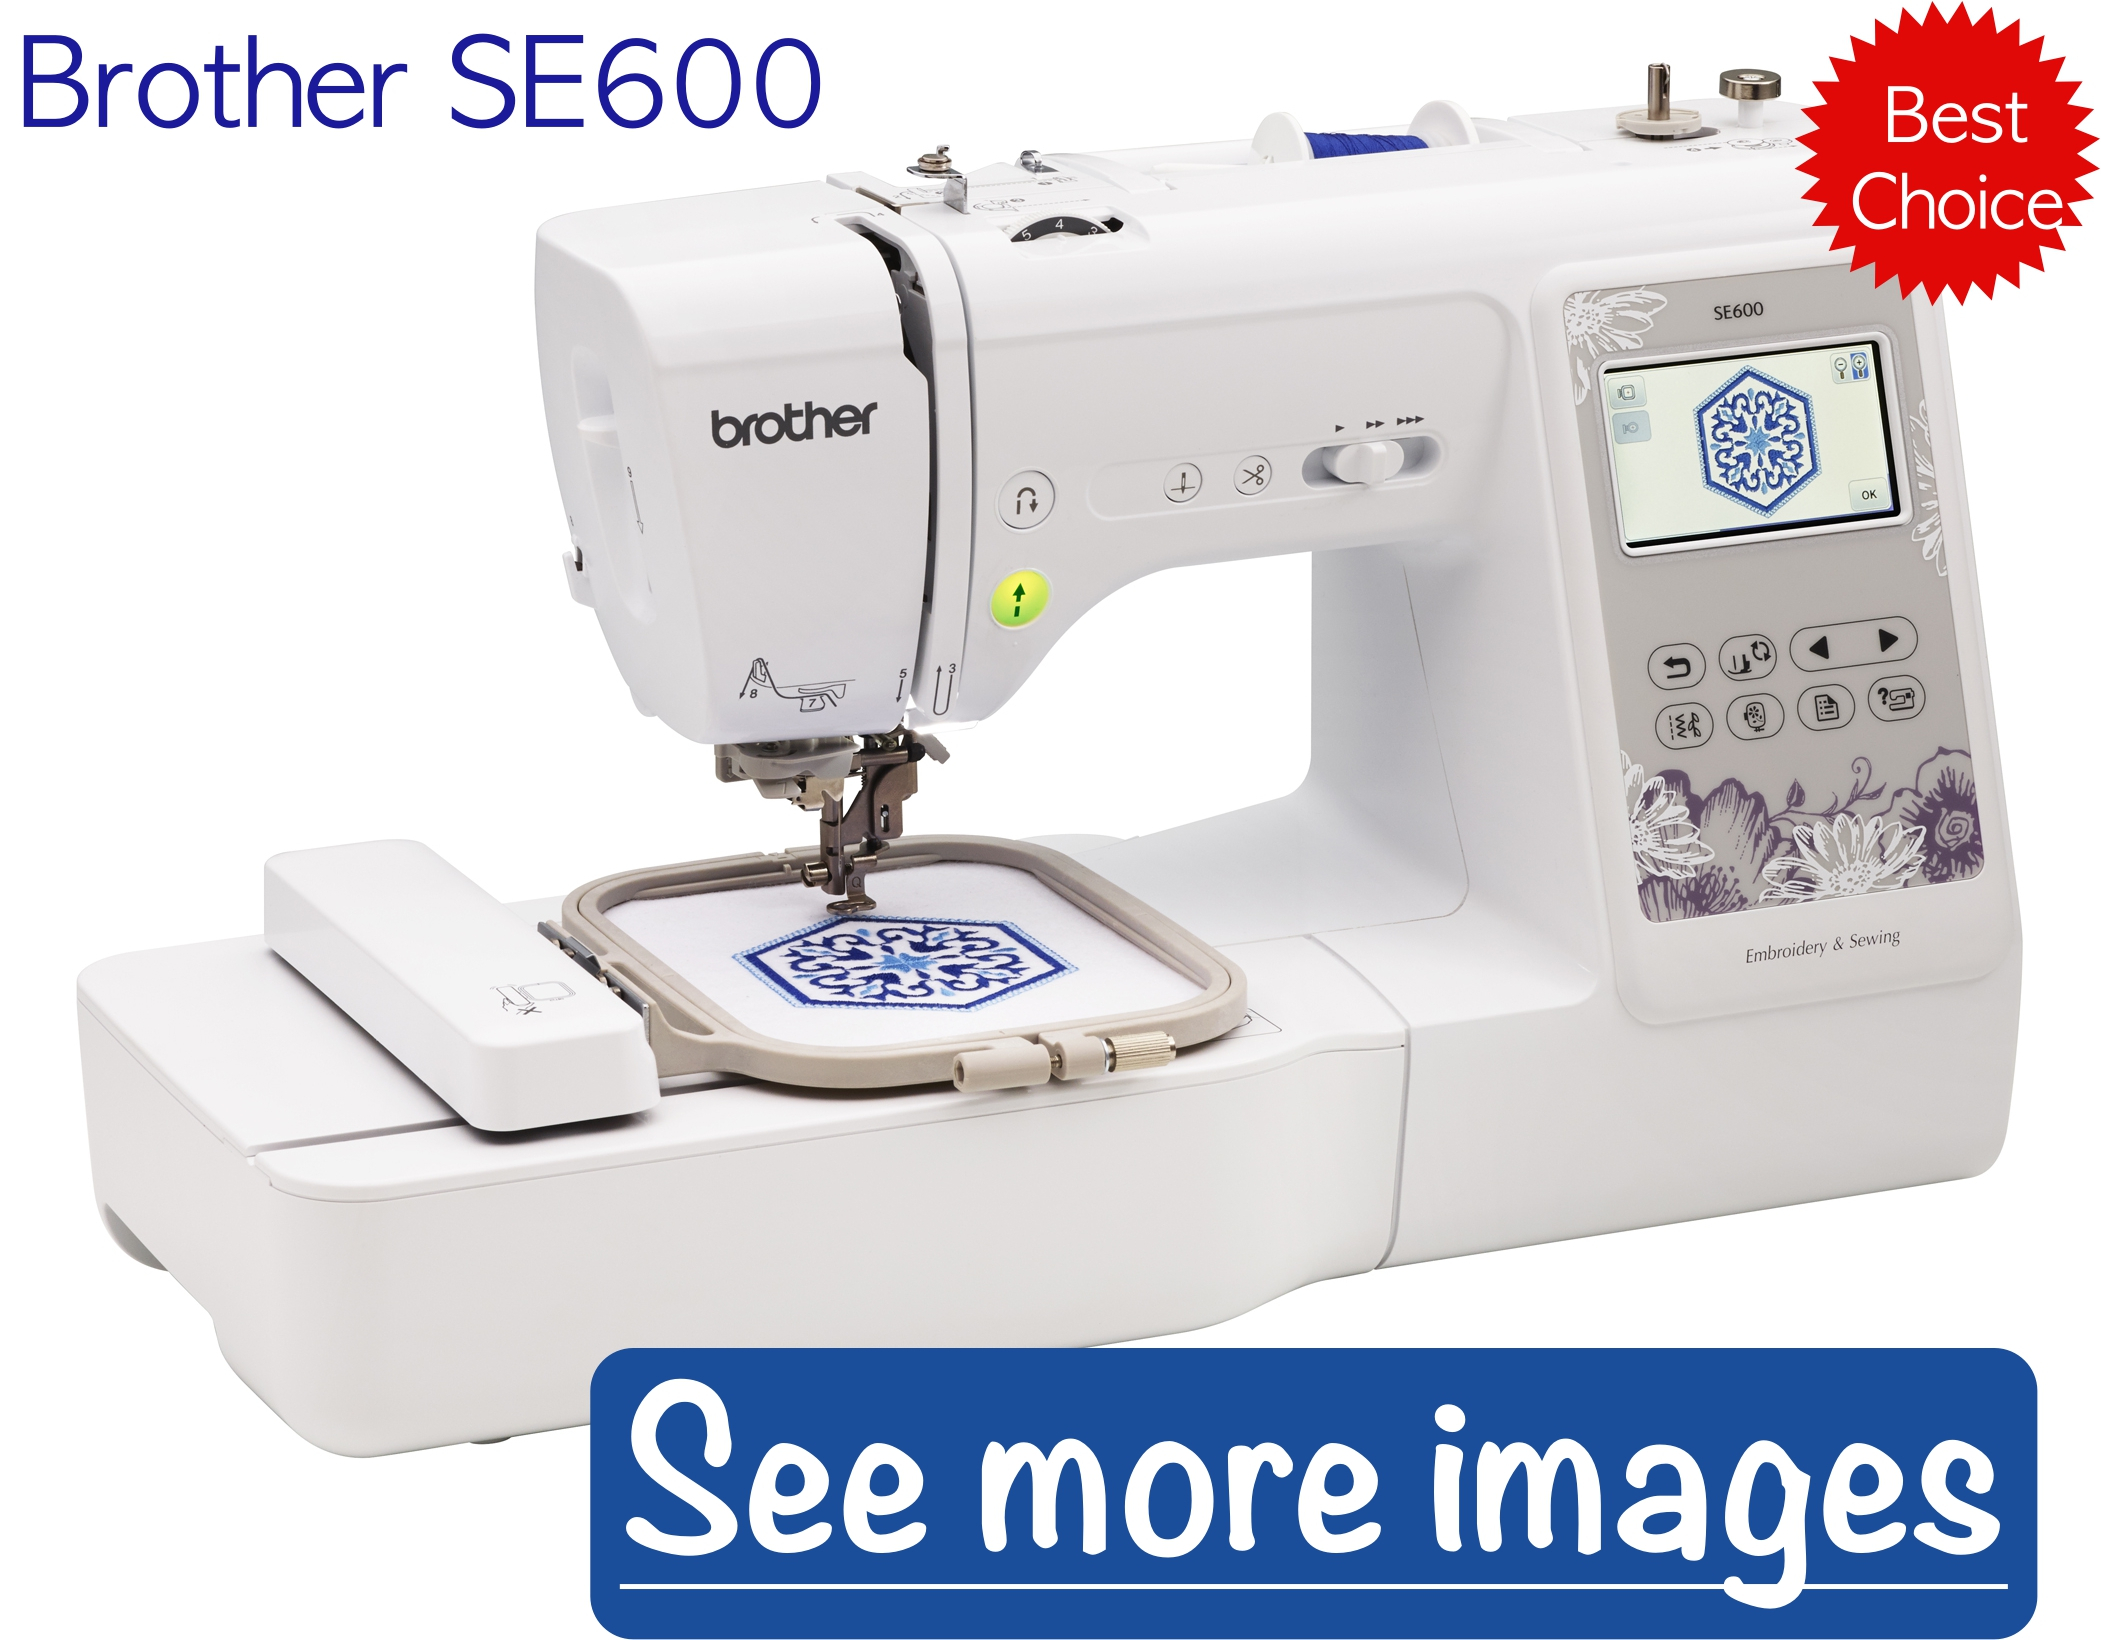 Free Machine Embroidery Patterns Brother Brother Se600 Review Specs Features Pros Cons Best Sewing